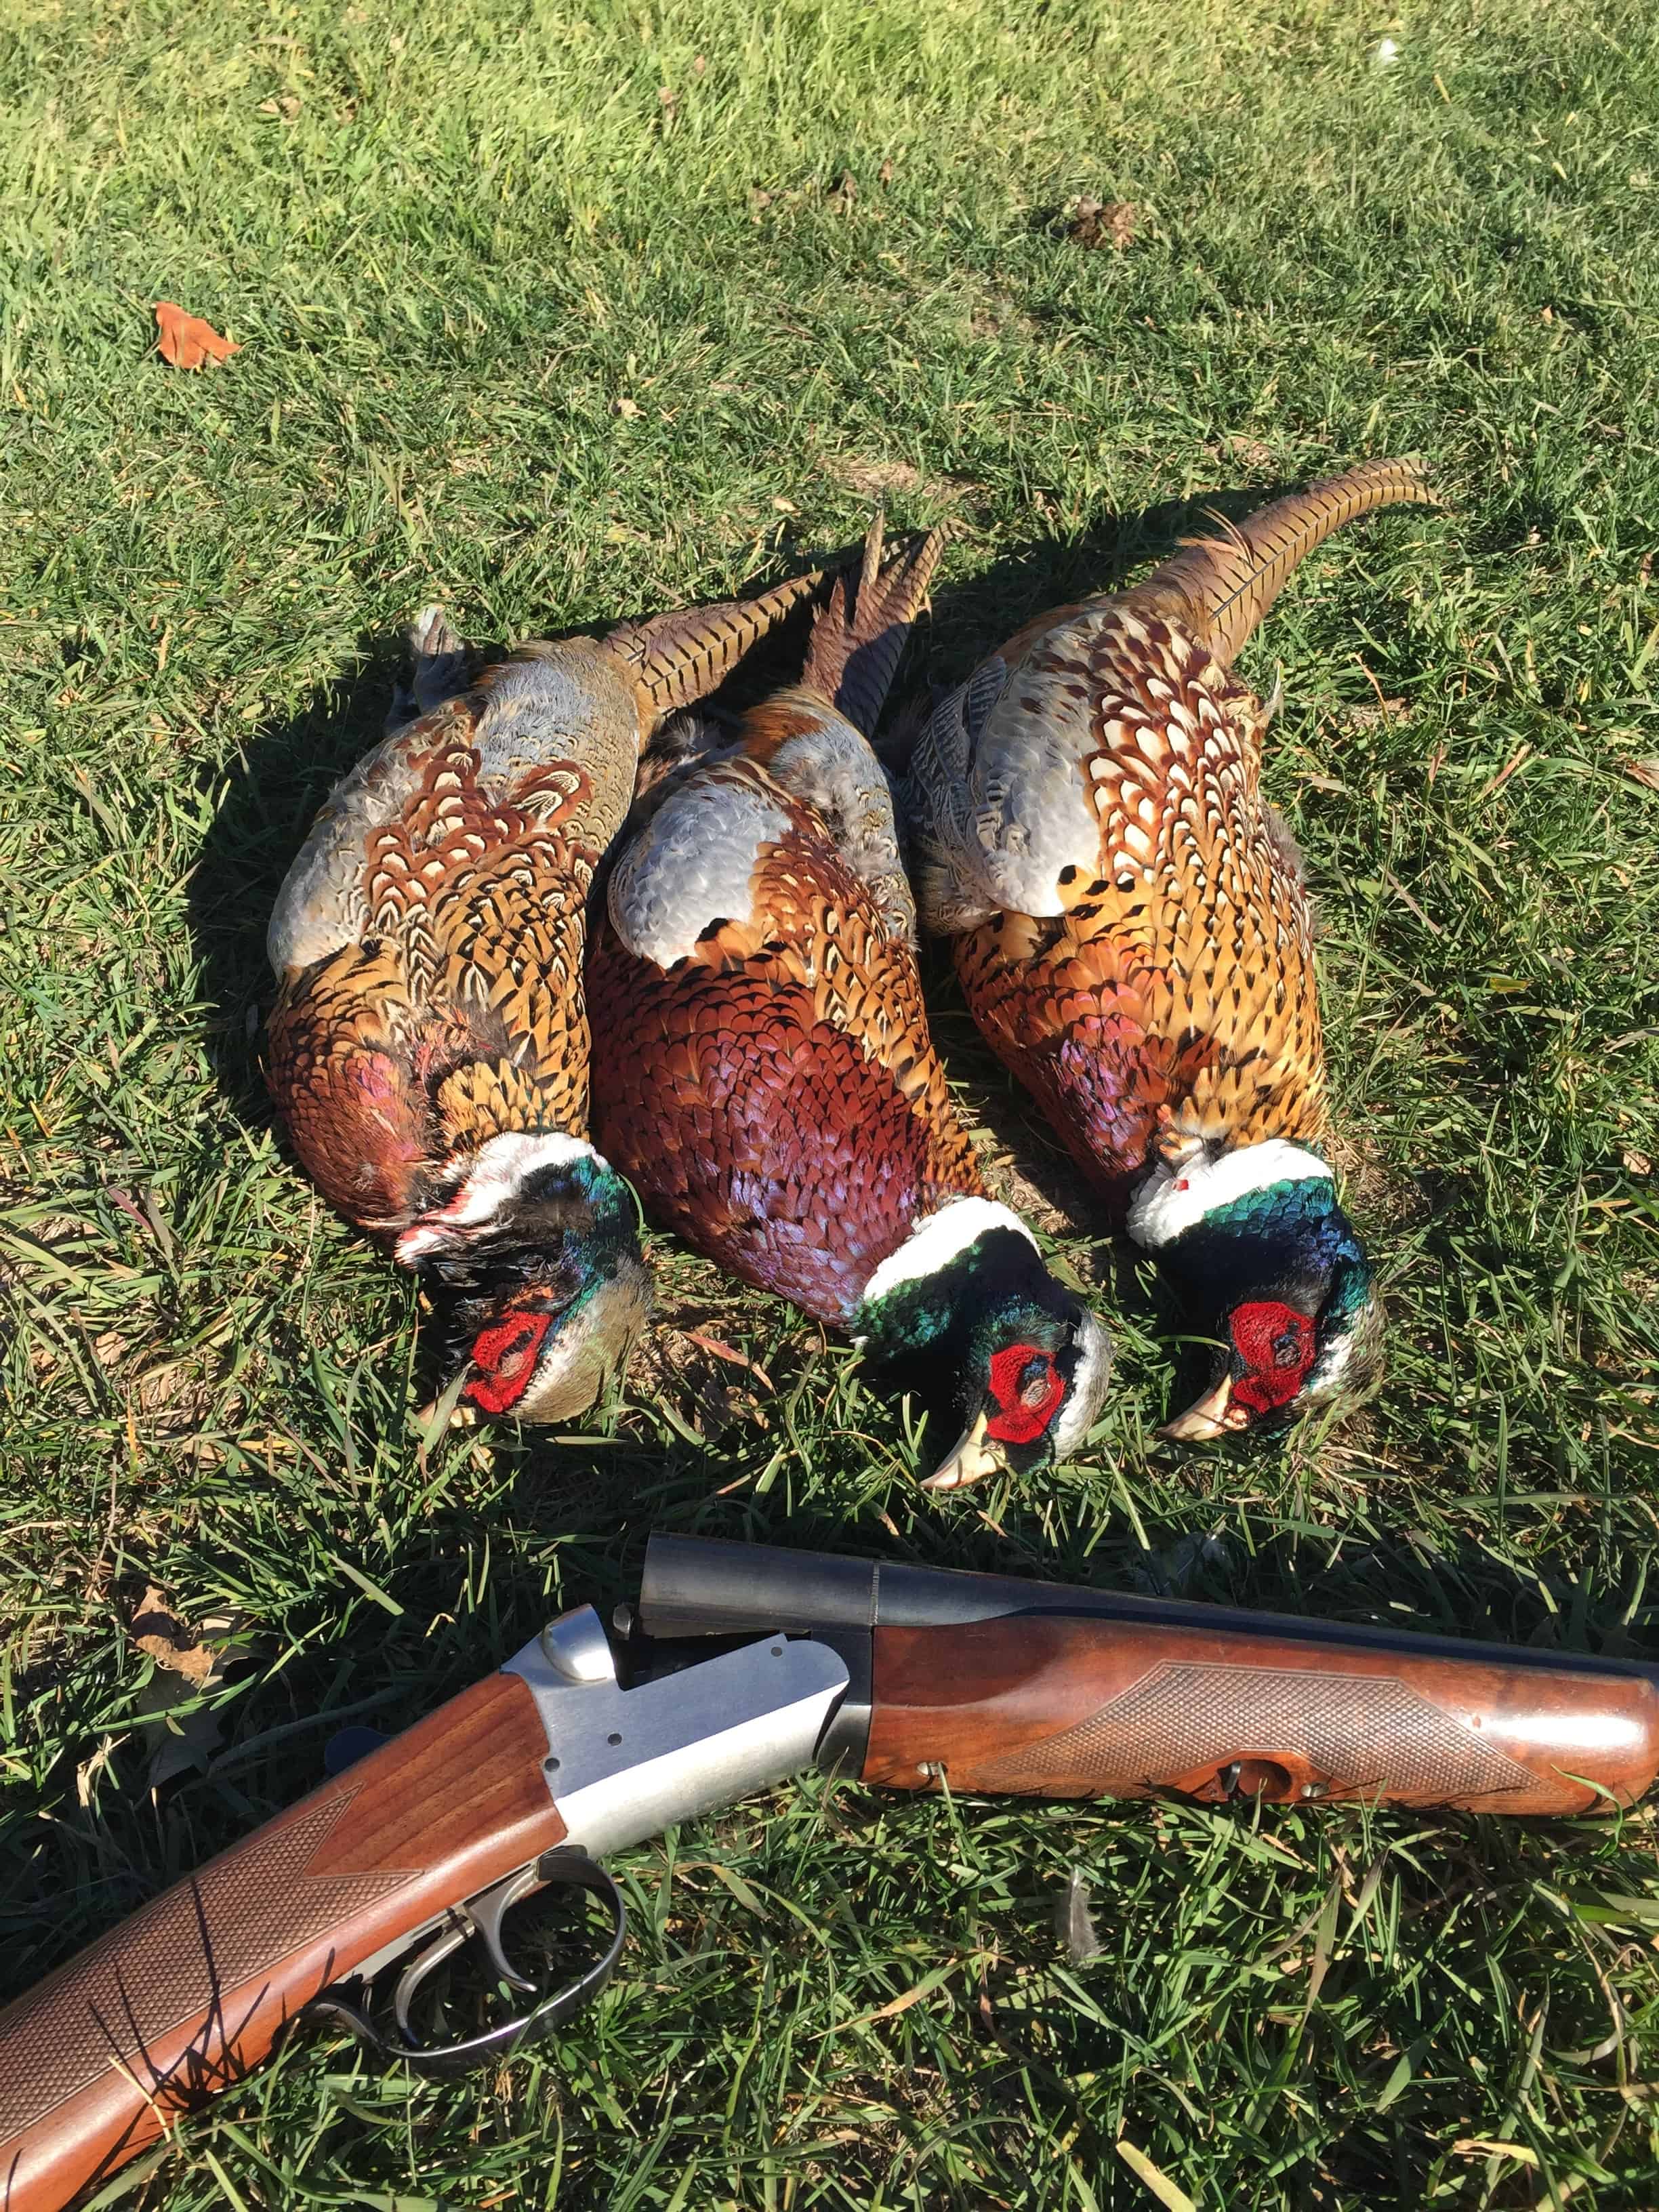 Pheasant Hunting Gear List, Upland Game Adventures 